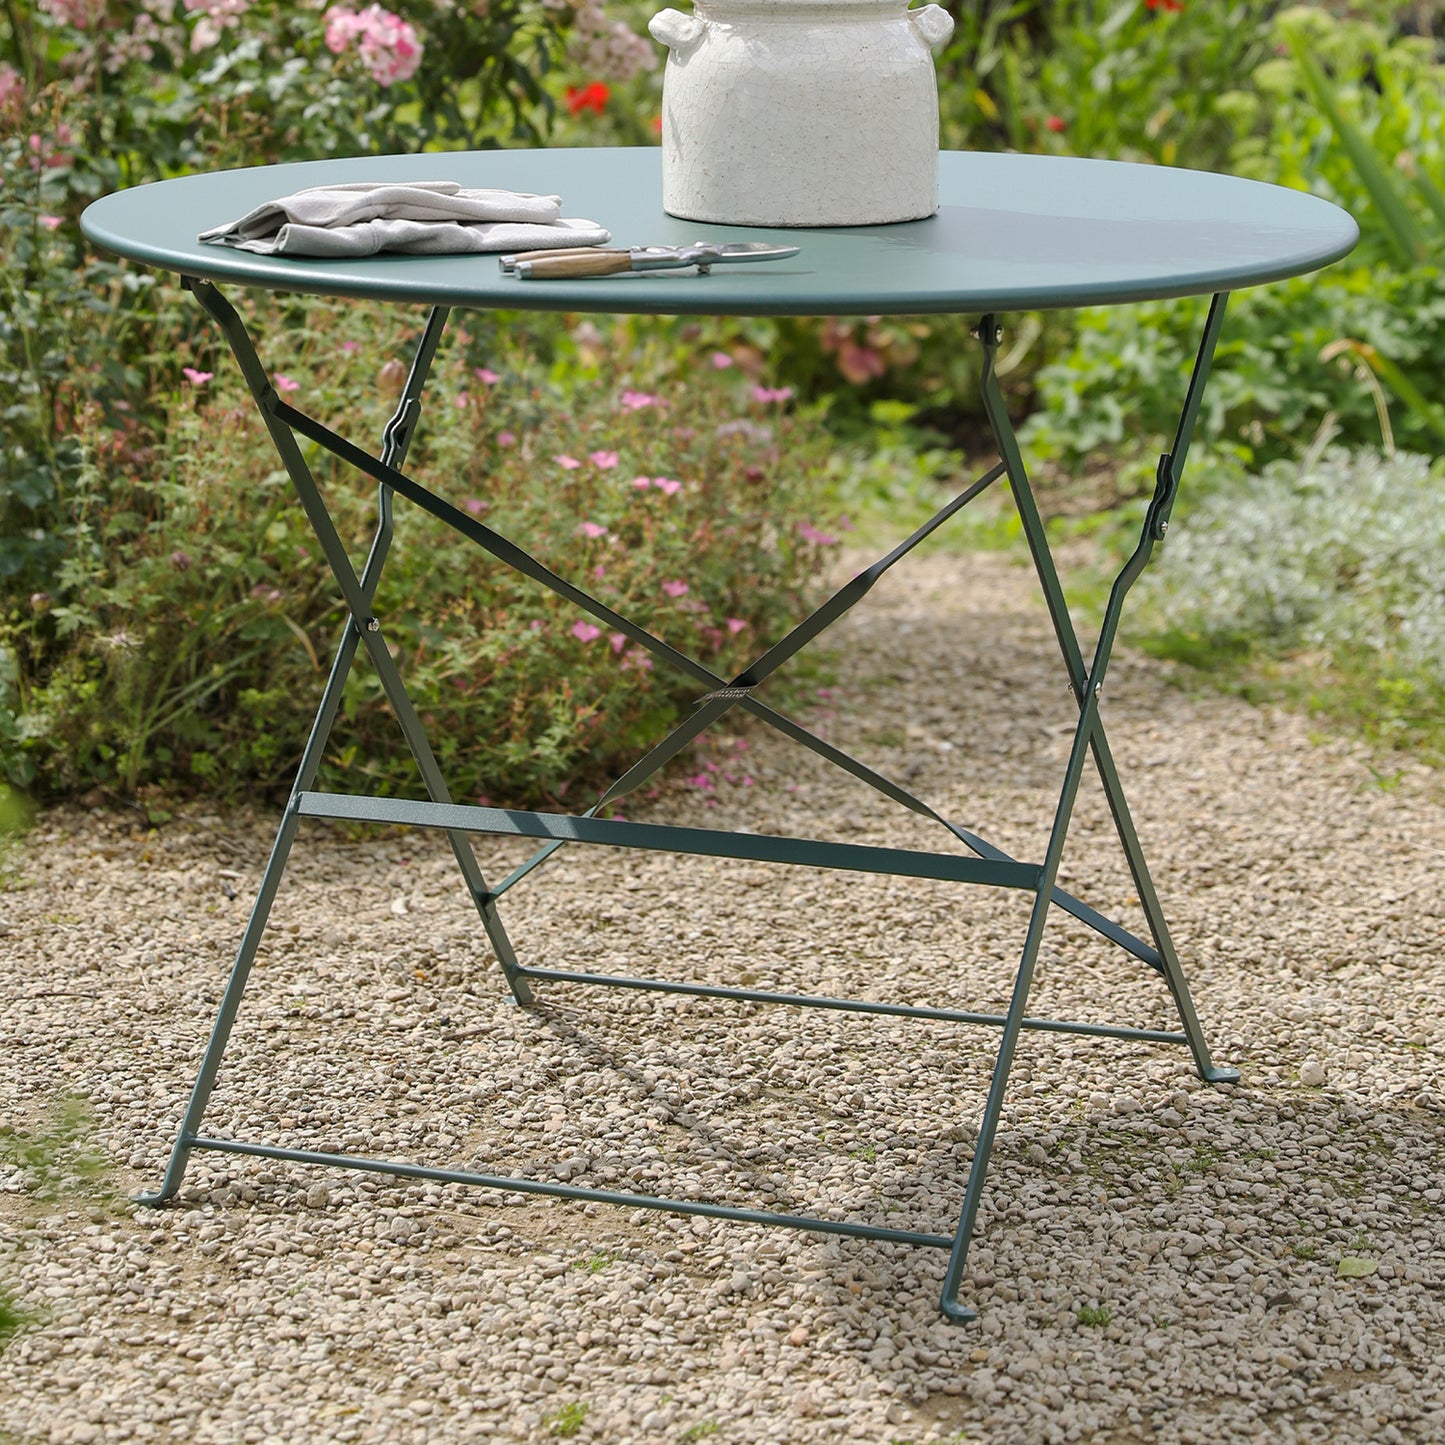 Rive Droite Bistro Table Large Forest Green Steel by Garden Trading